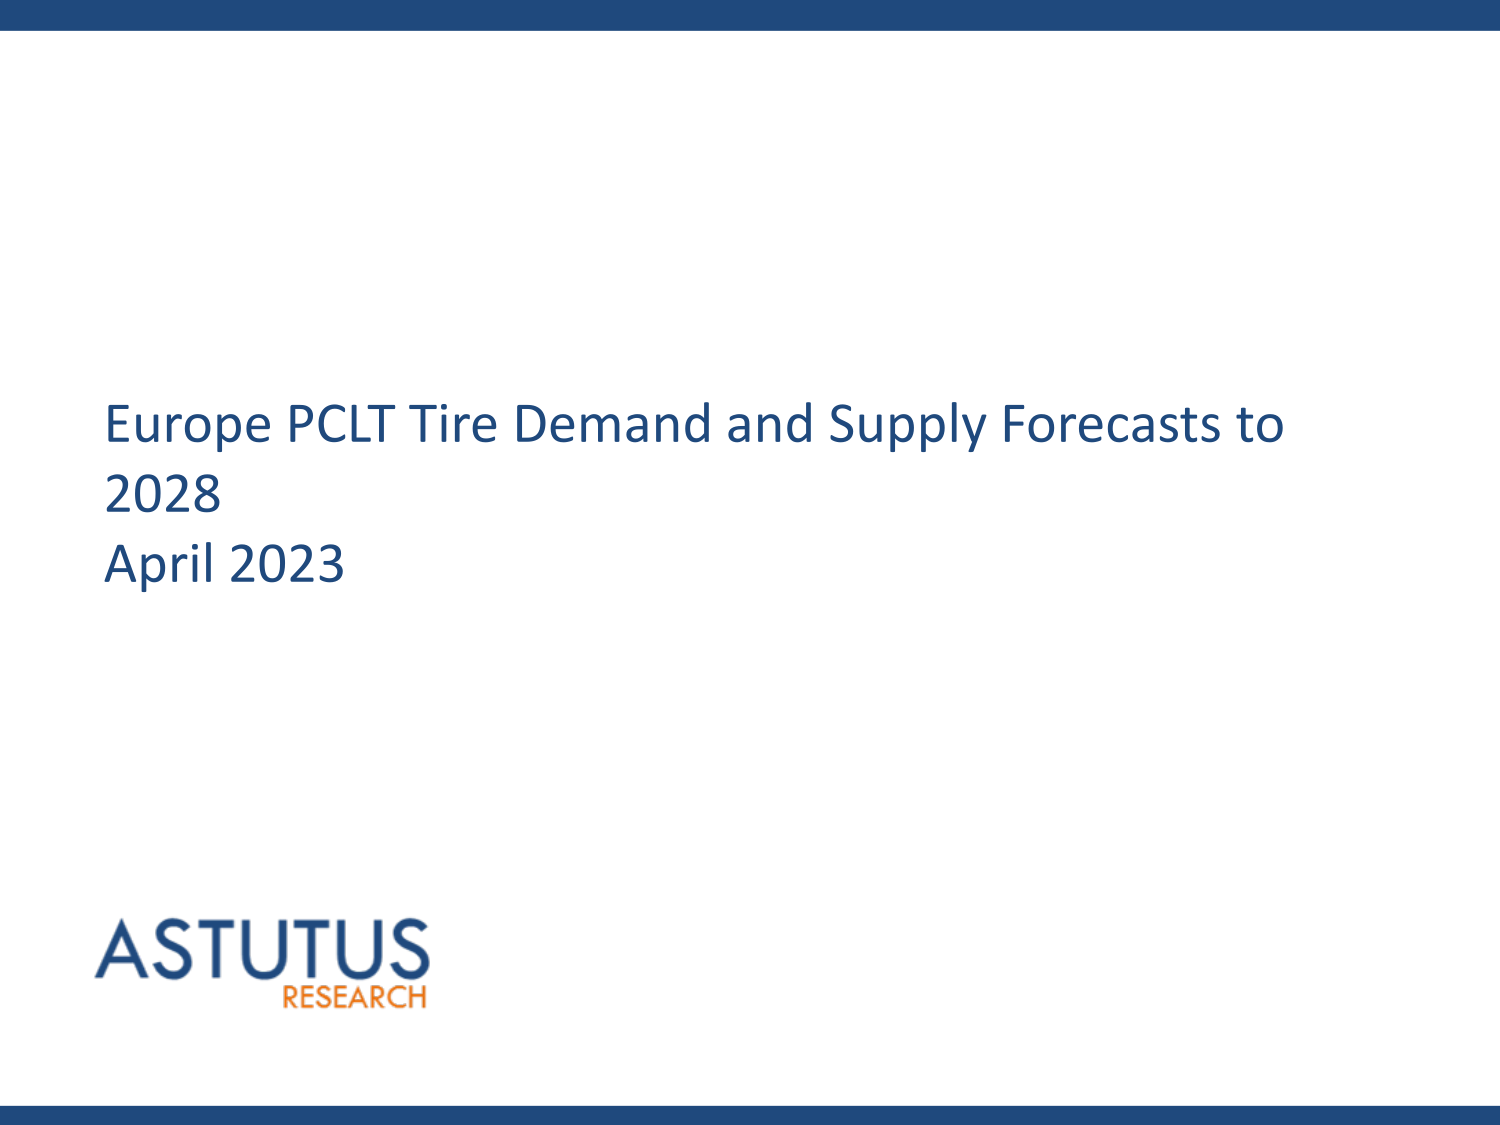 Europe PCLT Tire Market Supply & Demand Forecasts to 2028